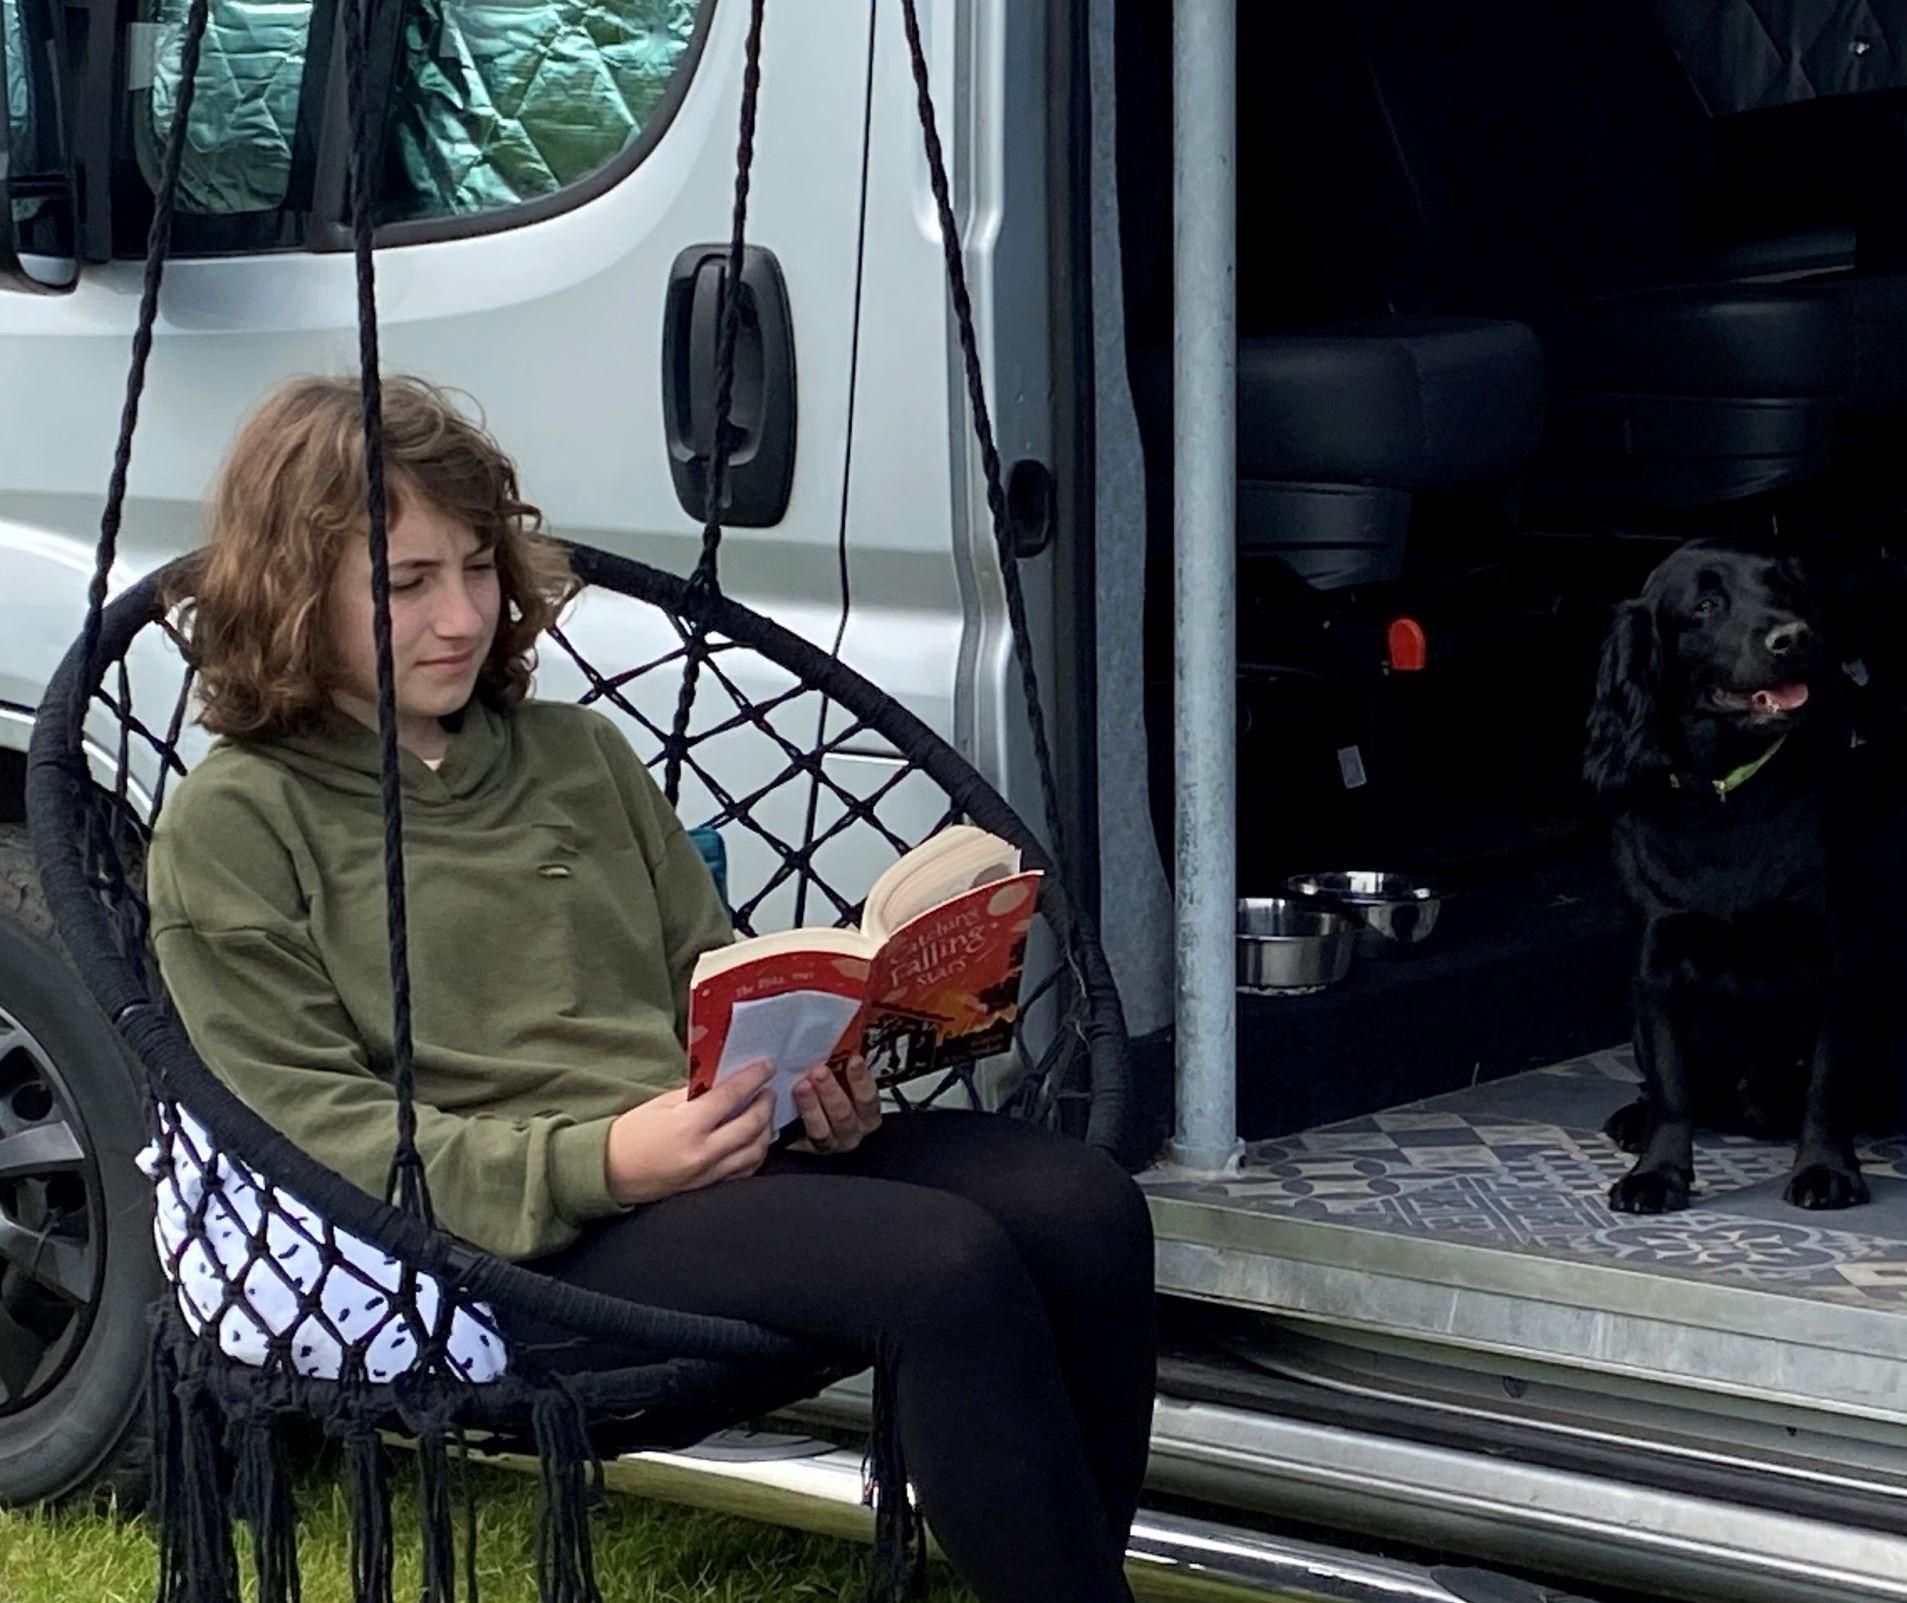 Camping hunstanton: A girl reading a book next to a motorhome